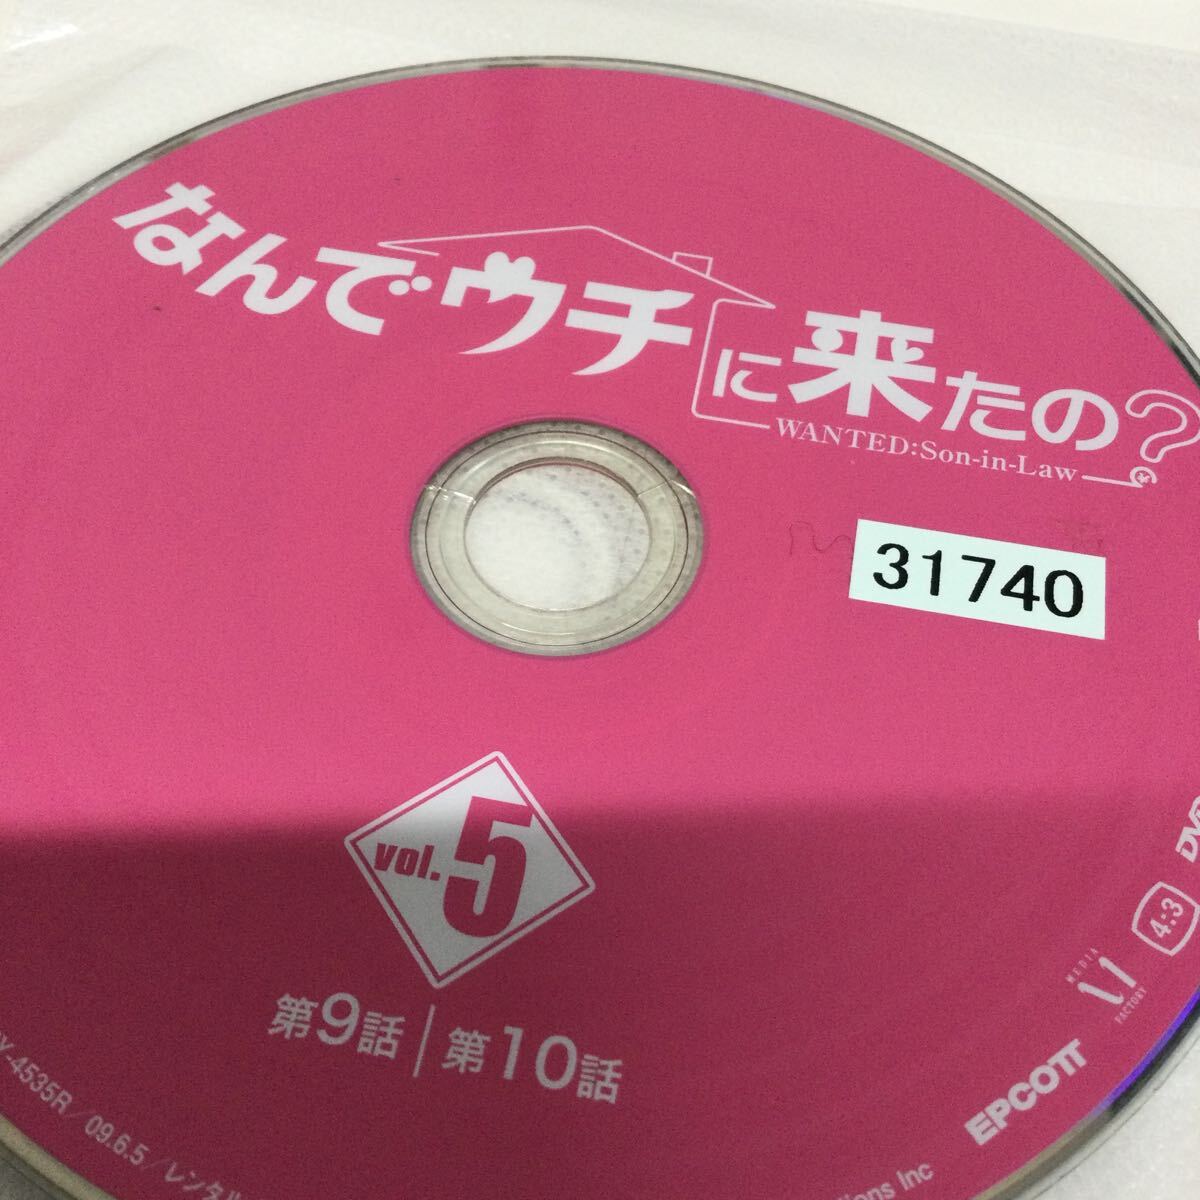 0441...uchi. came.? all 10 volume * jacket crack,⑤ disk centre crack equipped rental DVD case none jacket attaching 